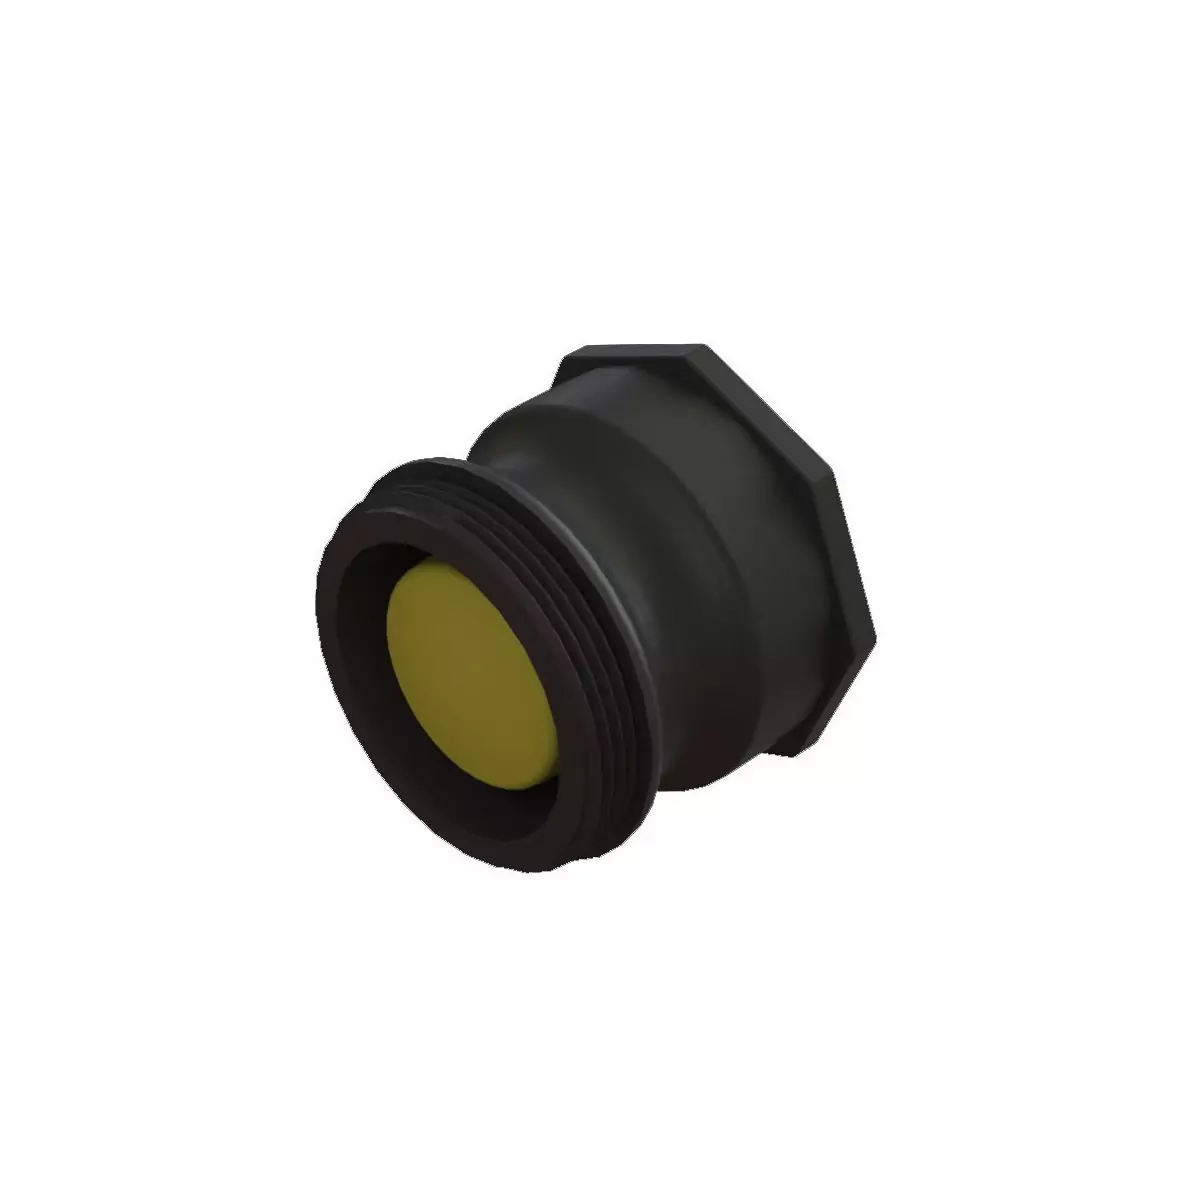 S60x6 female connector - male 2 inch camlock